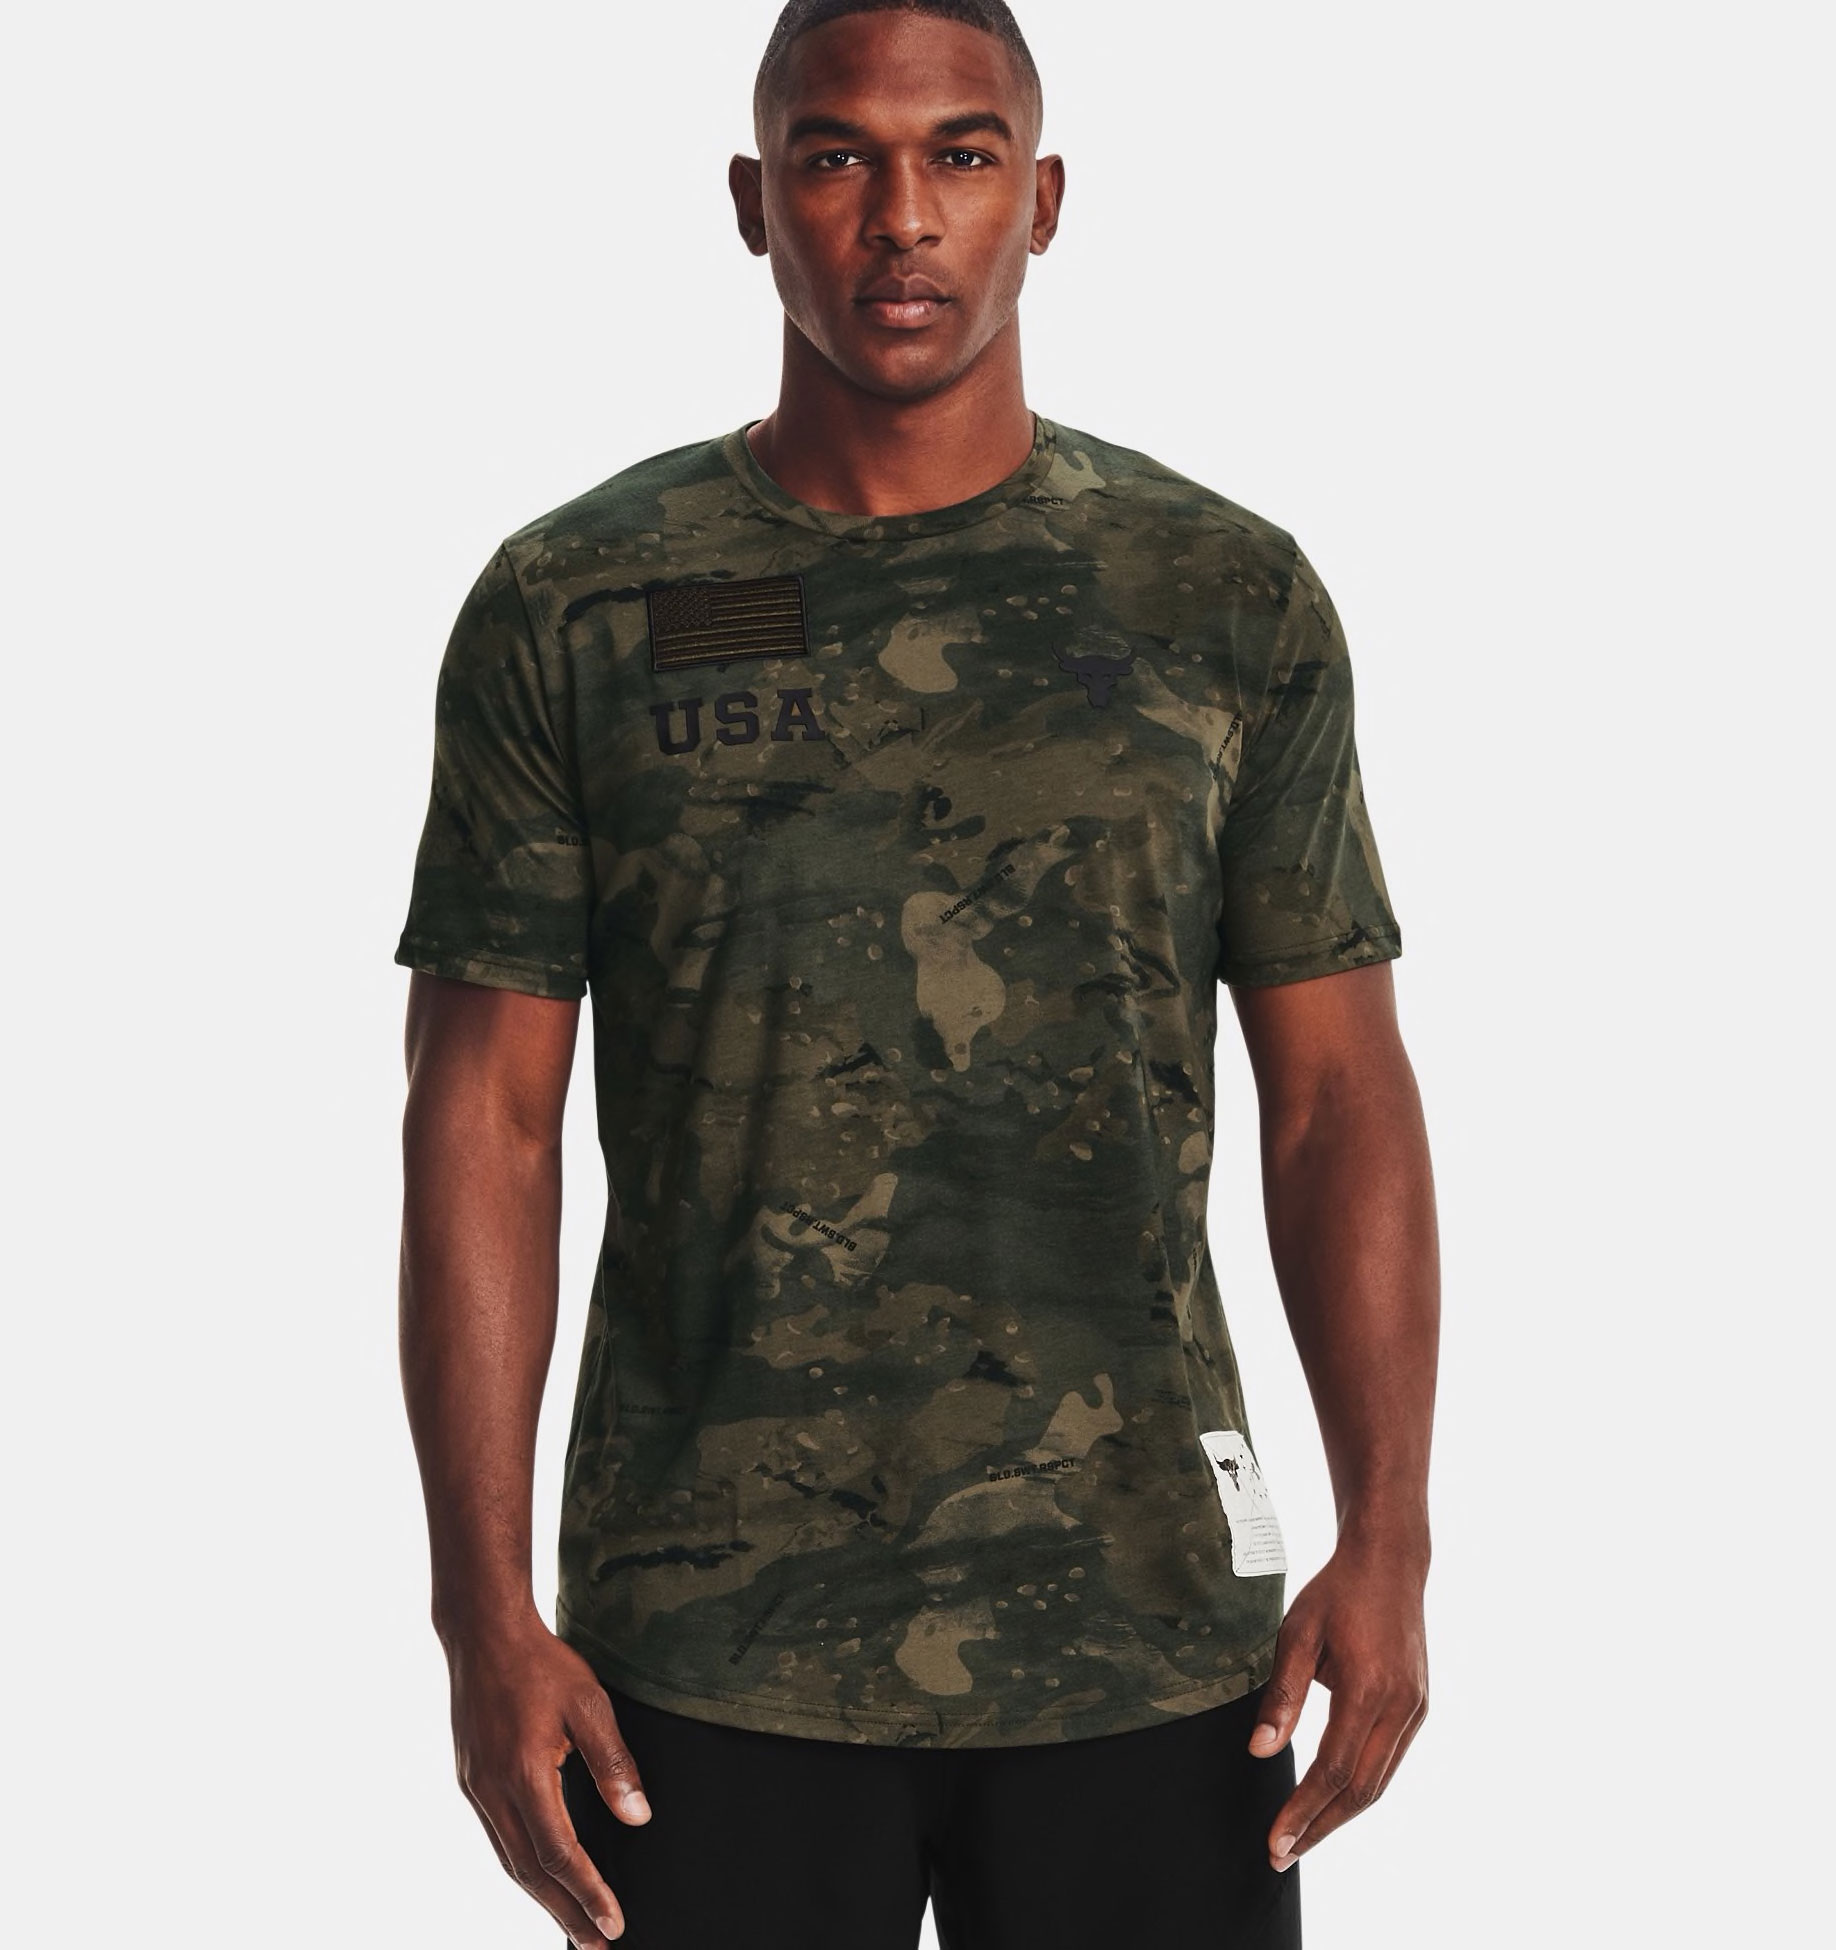 Project Rock Veterans Day 2020 Clothing | FighterXFashion.com